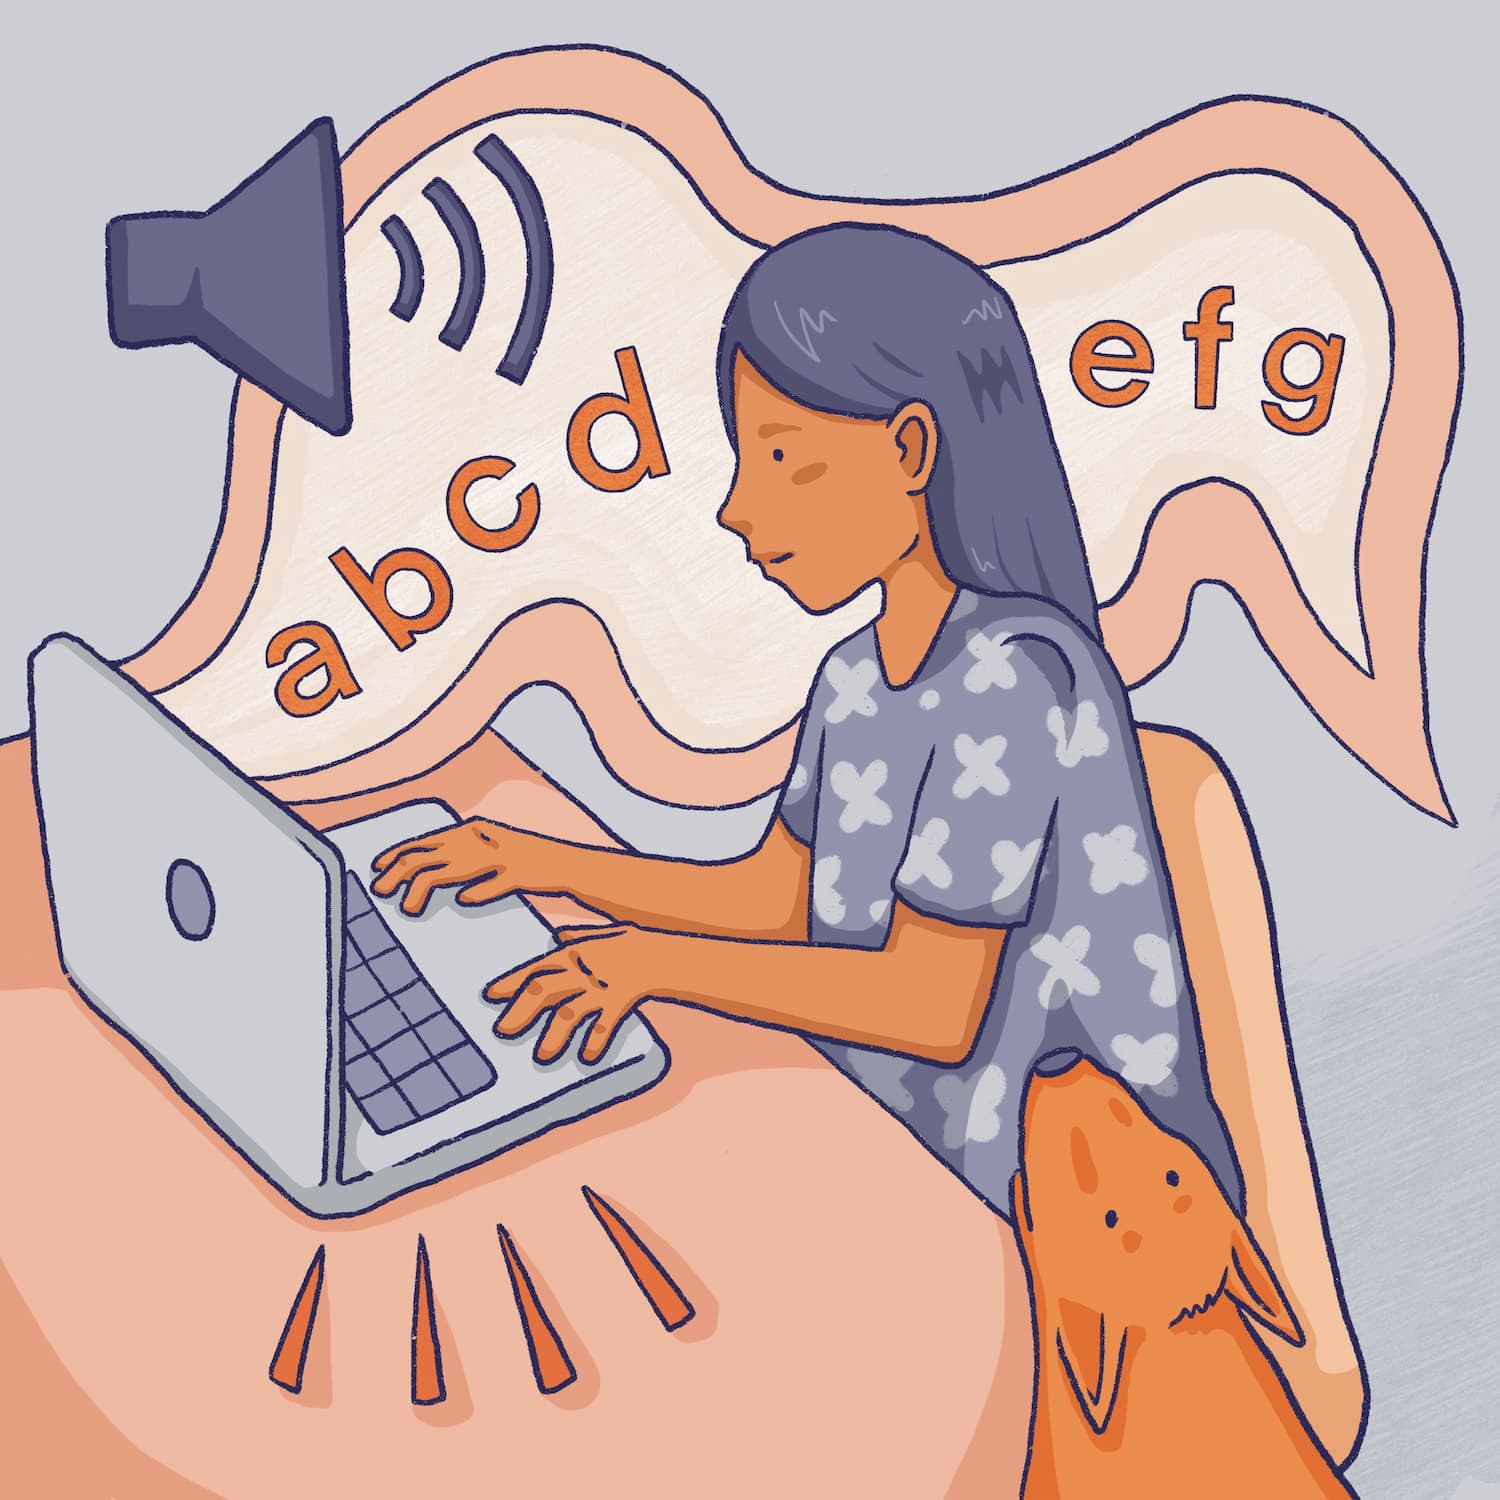 An illustration of a person using a laptop. There is an audio icon with the letters 'A B C D E F G' coming out of the laptop. There is a cute dog next to them.